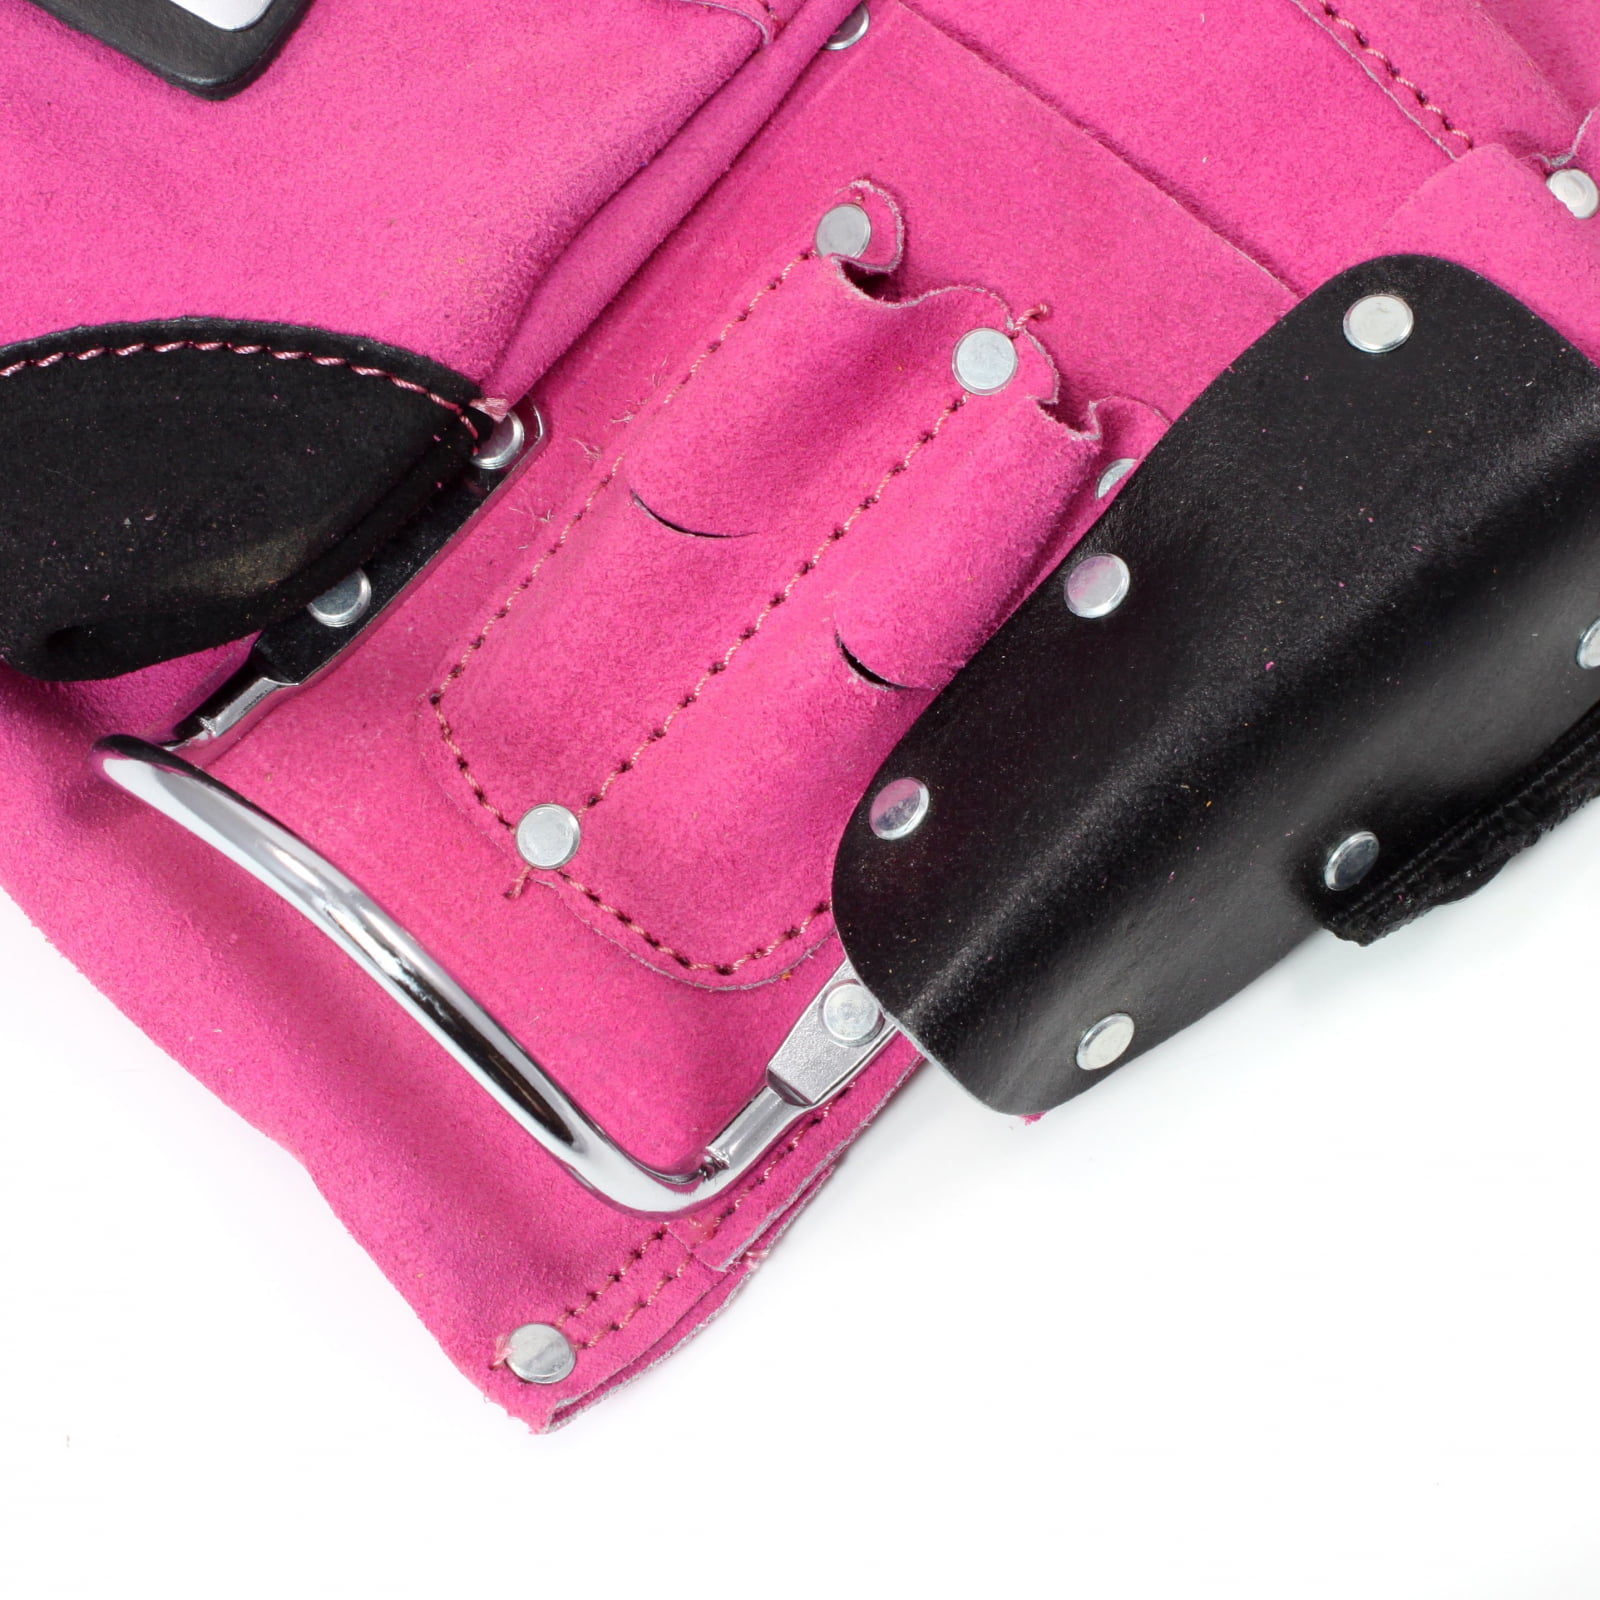 9 Pocket Tool Belt Pouch Heavy Duty Pink Suede Leather Fits Hammer And Nails 